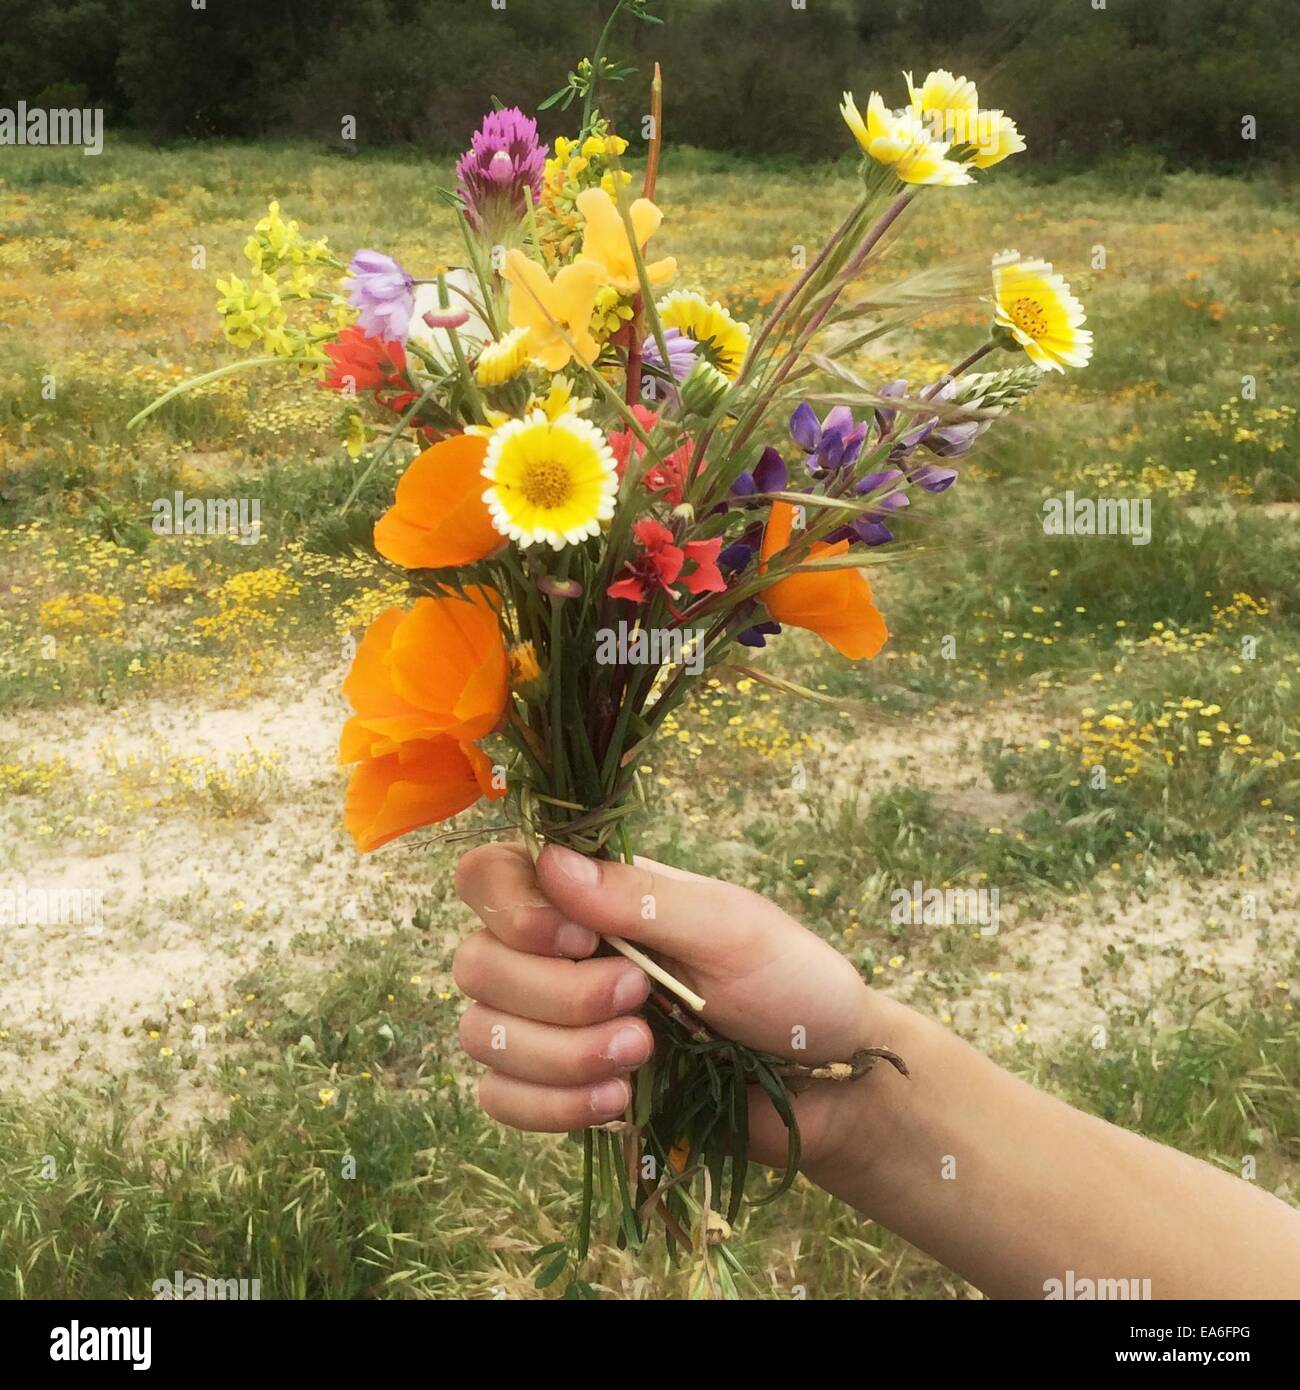 Hand holding bunch of flowers Stock Photo